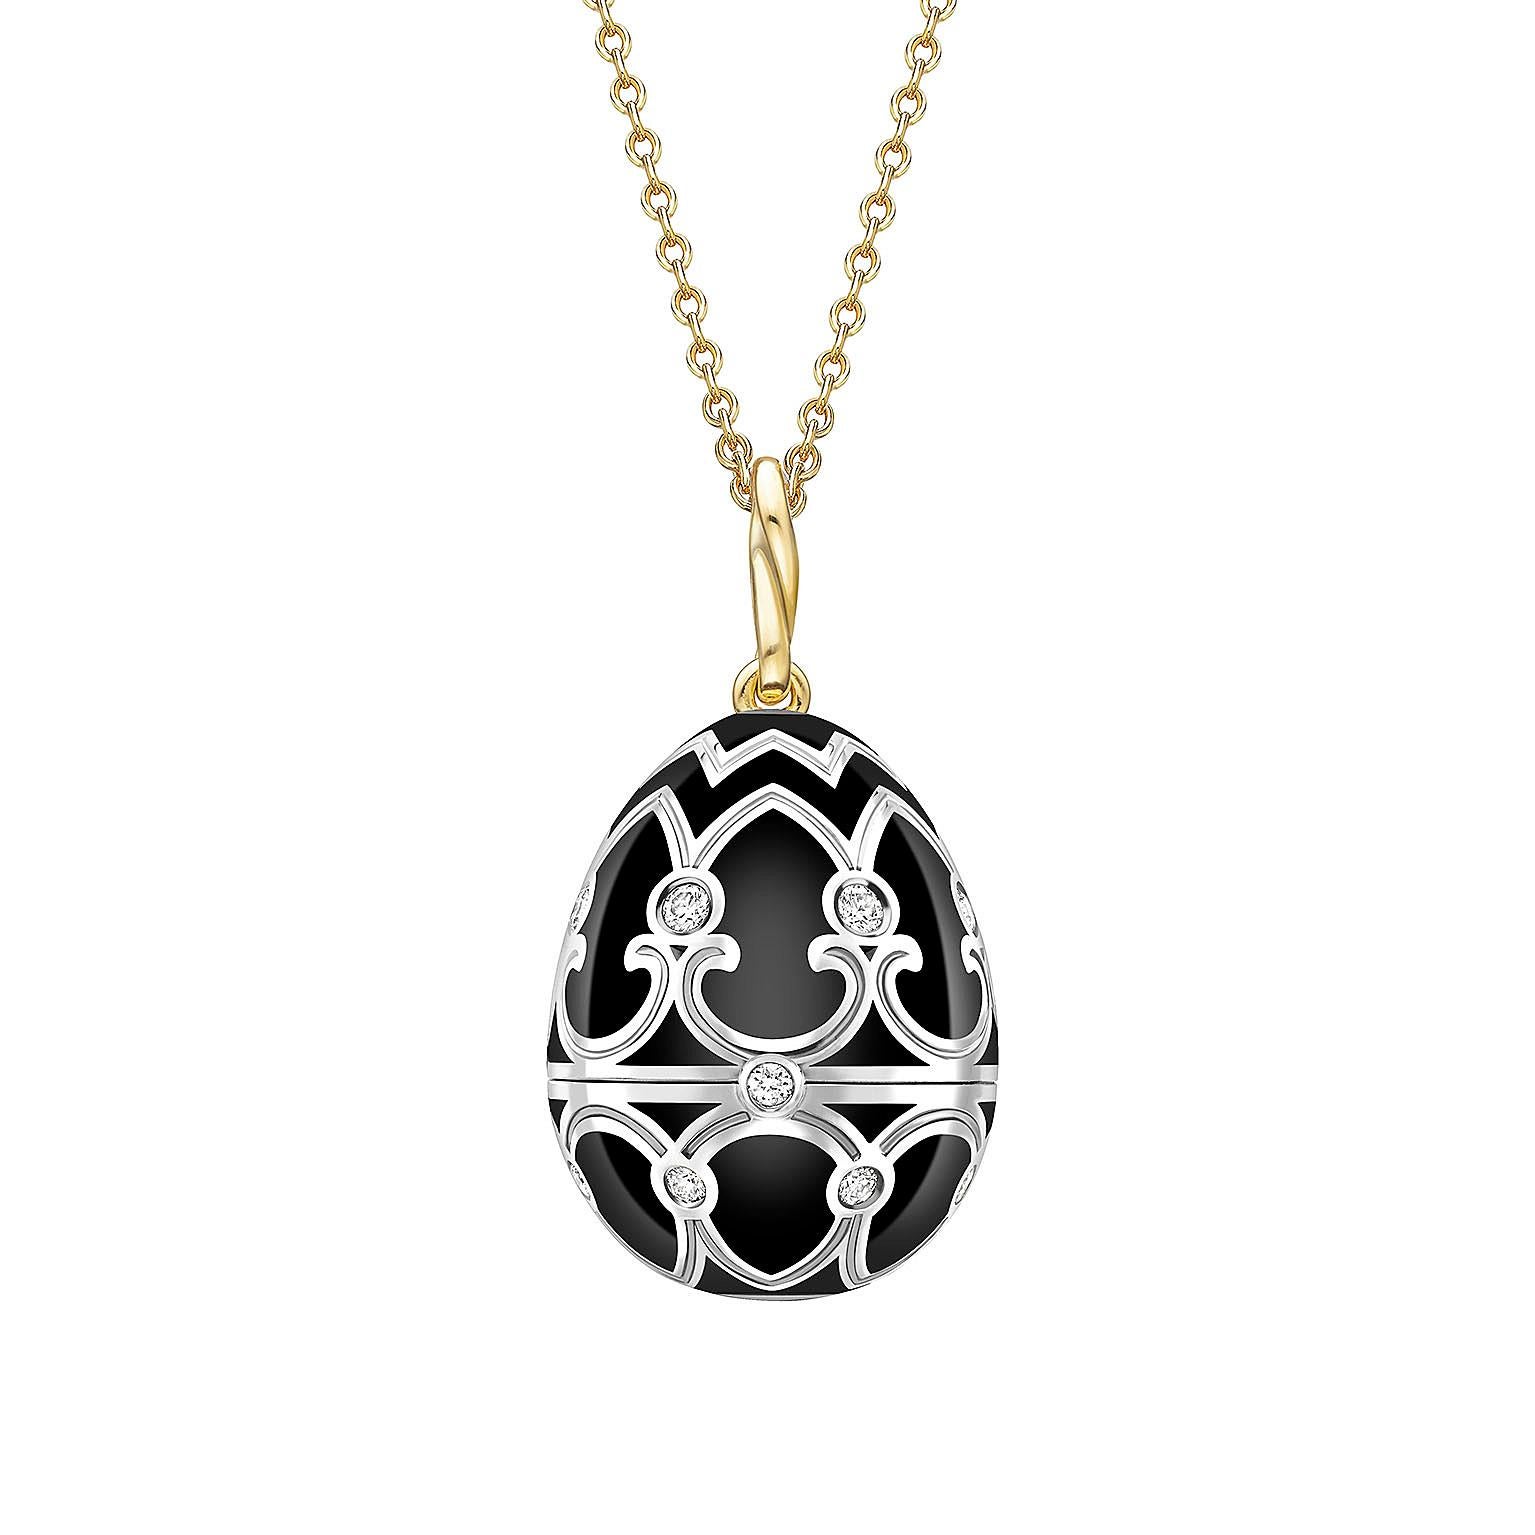 The Fabergé Heritage White Gold Diamond and Black Enamel Penguin Surprise Locket is crafted from 18k yellow gold, decorated with black and white enamel and set with a glittering white diamond eye.

The penguin dances on a sparkling silicate agate